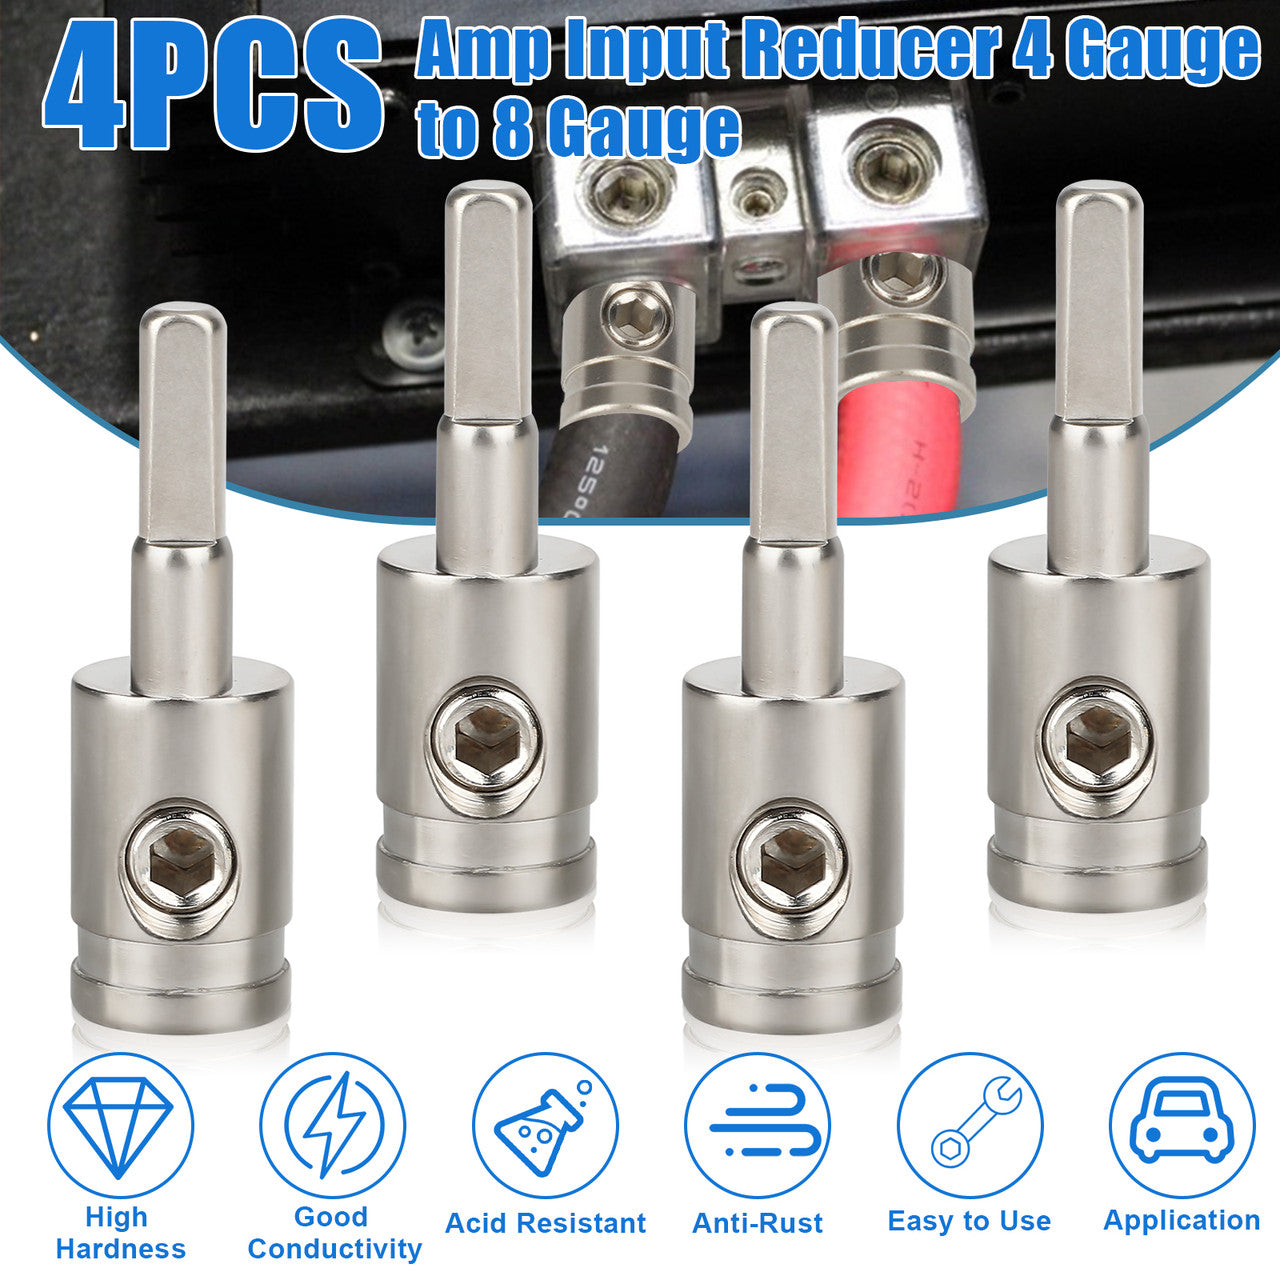 4 Pcs Amp Input Reducer - 4 Gauge to 8 Gauge Ground Input Reducer Connection Brass with Nickel Plated for most cars (Sliver)